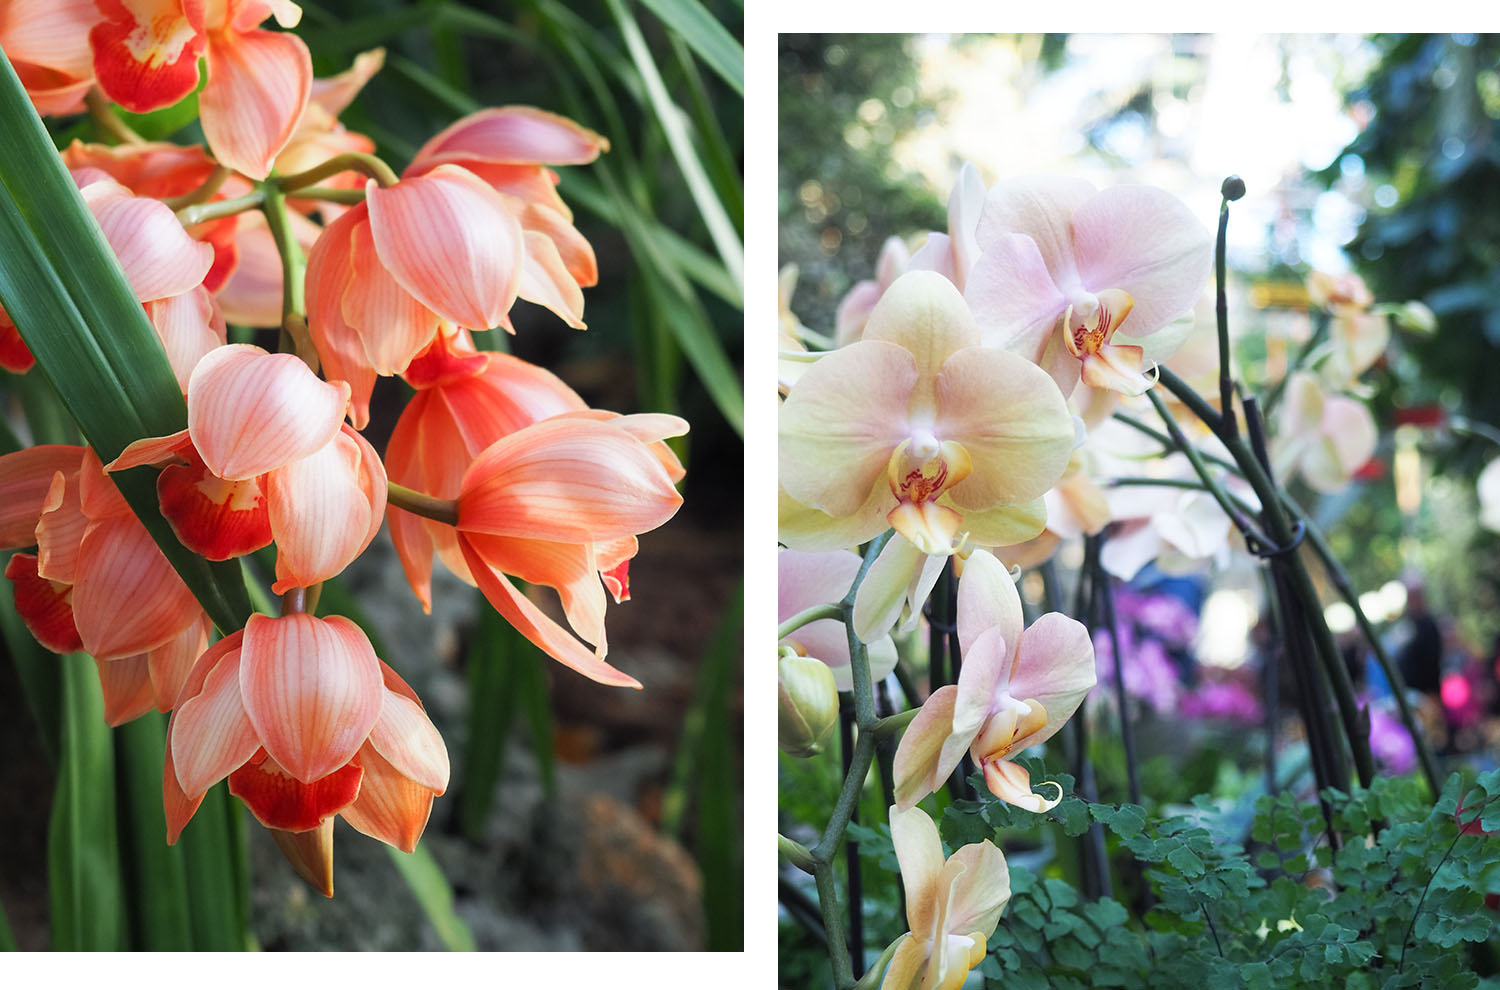 Orange and peach orchids grow at the United States Botanic Garden in Washington DC, as photographed by travel blogger Cee Fardoe of Coco & Vera